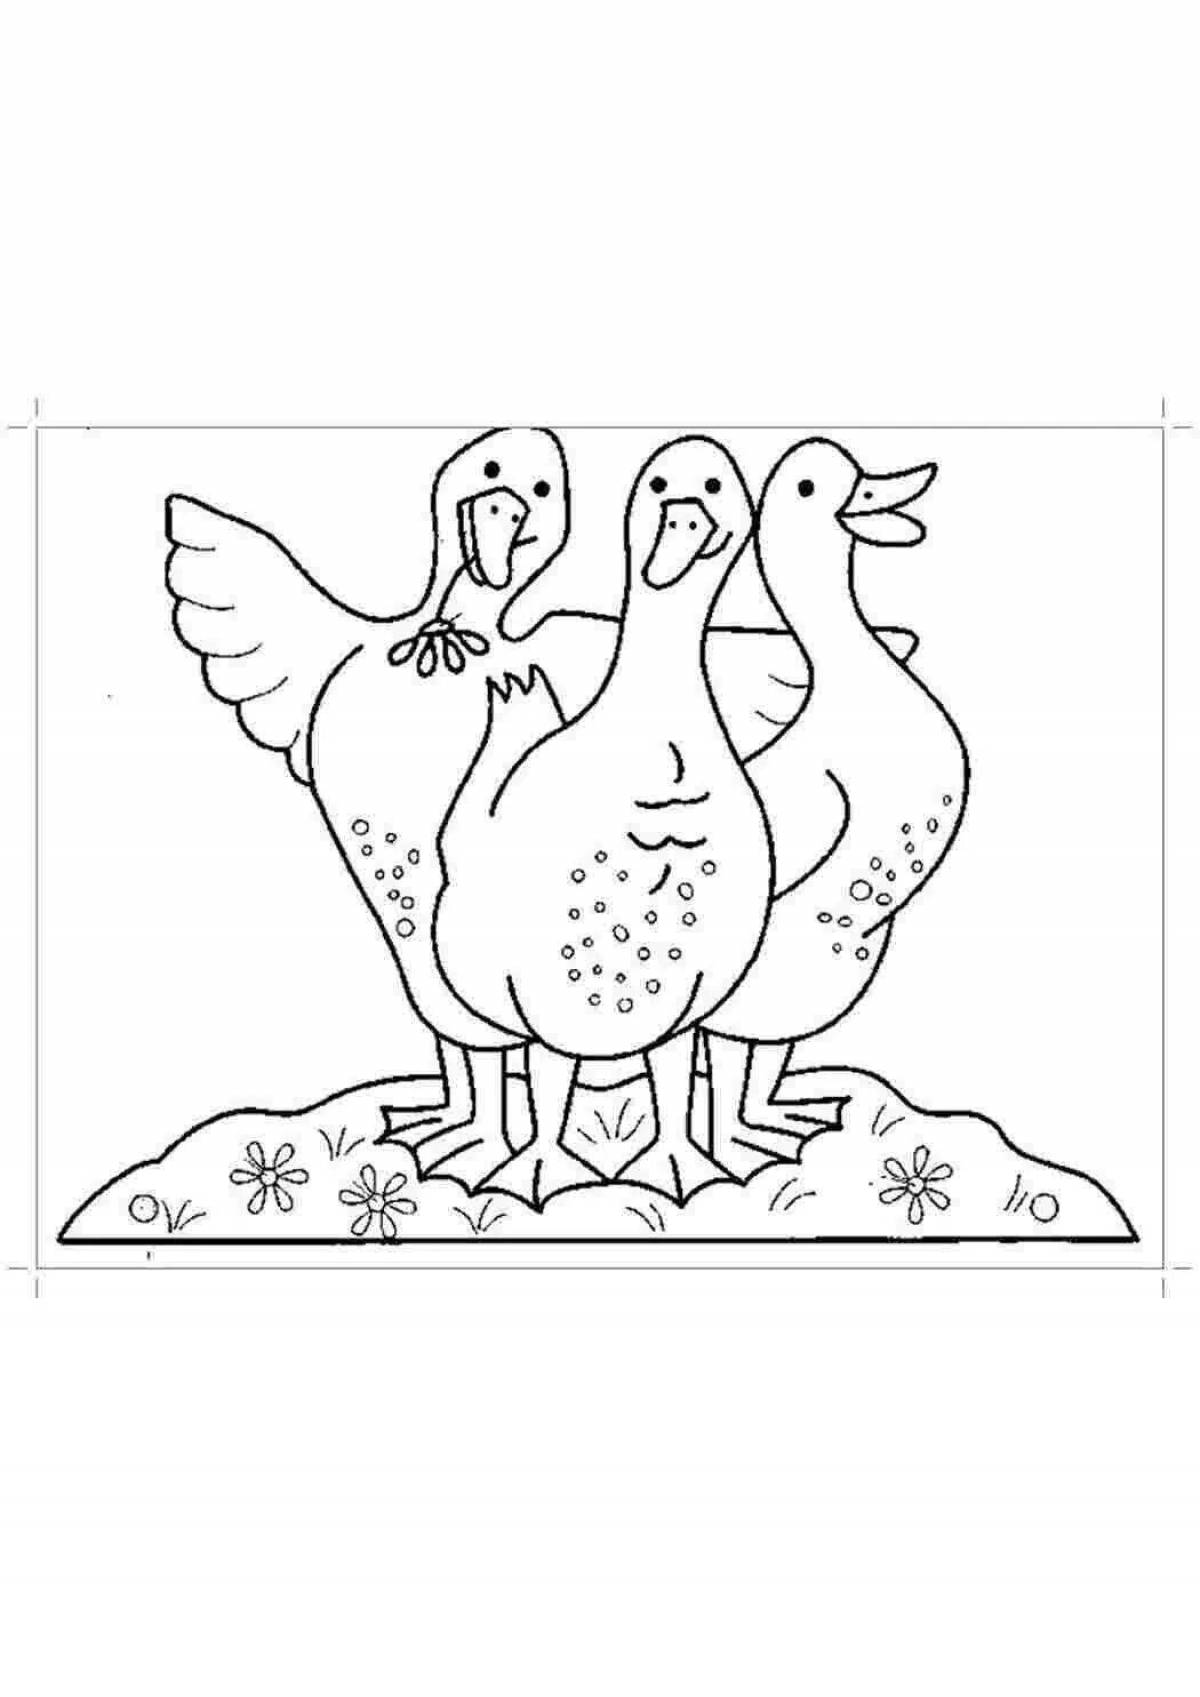 A wonderful goose coloring book for kids